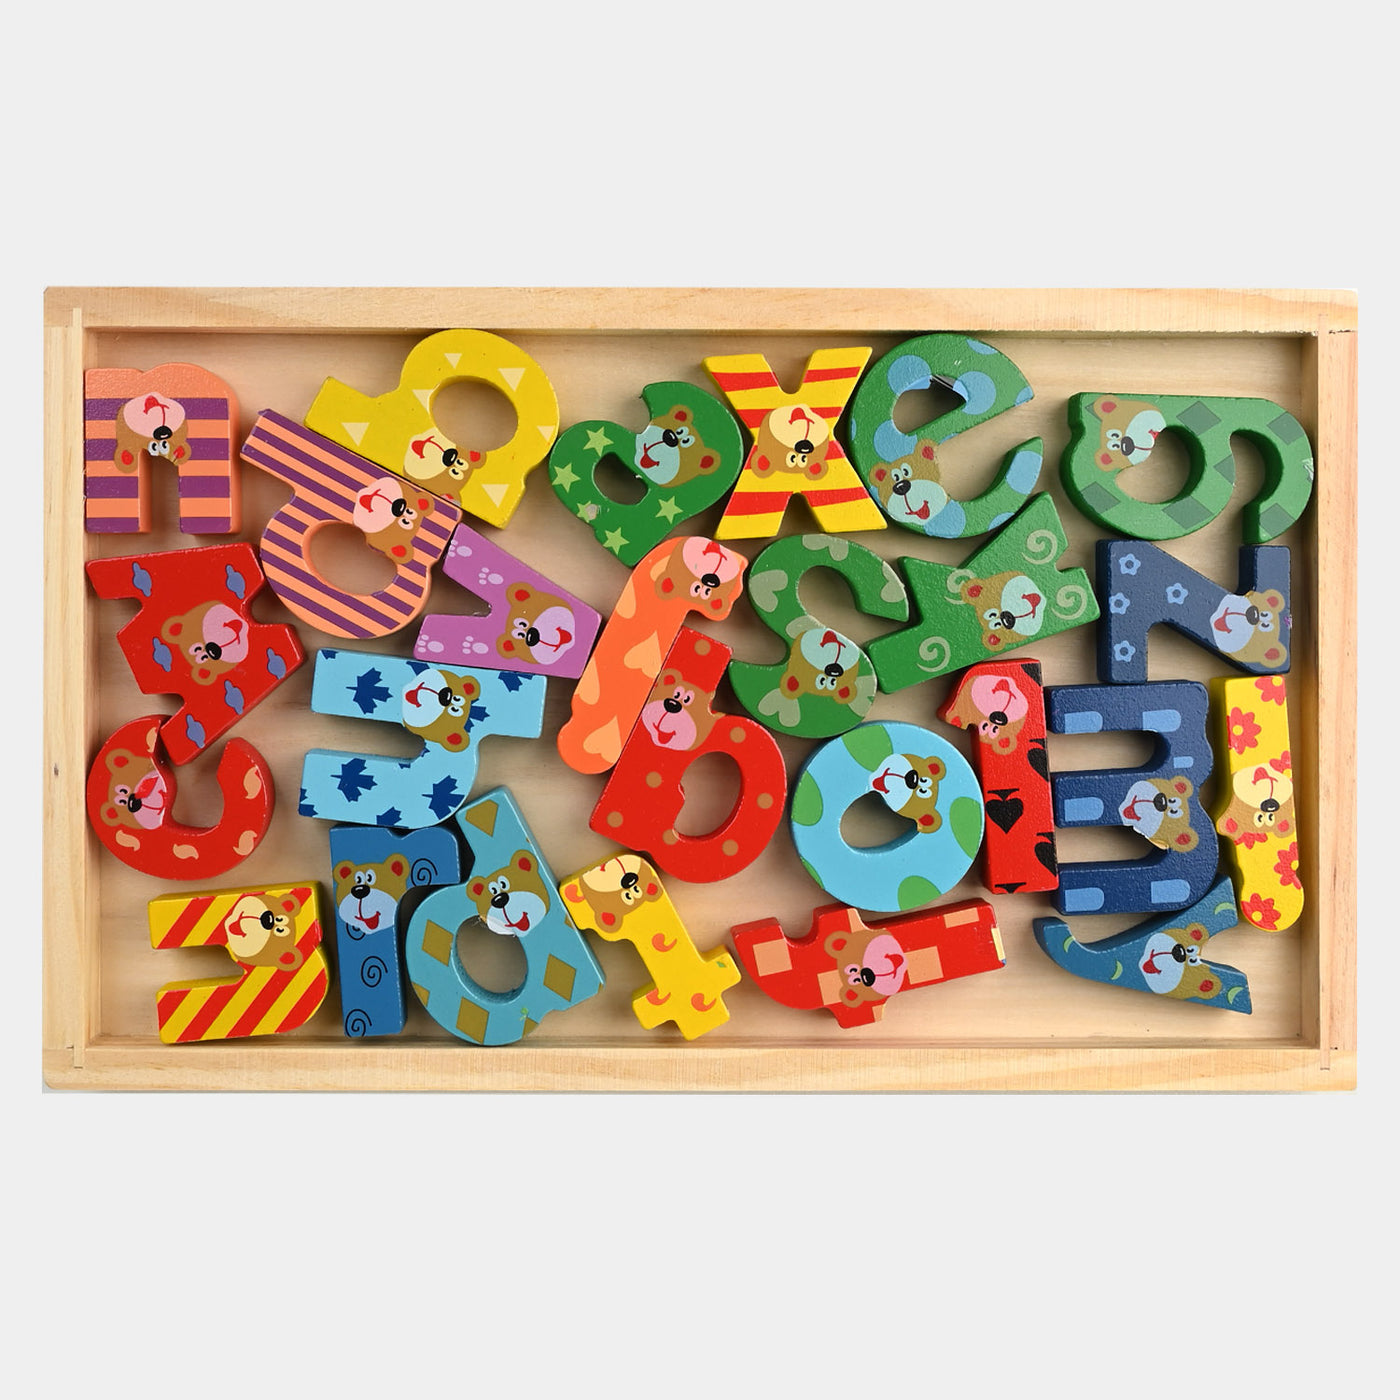 Wooden Education Small Alphabets Blocks For Kids